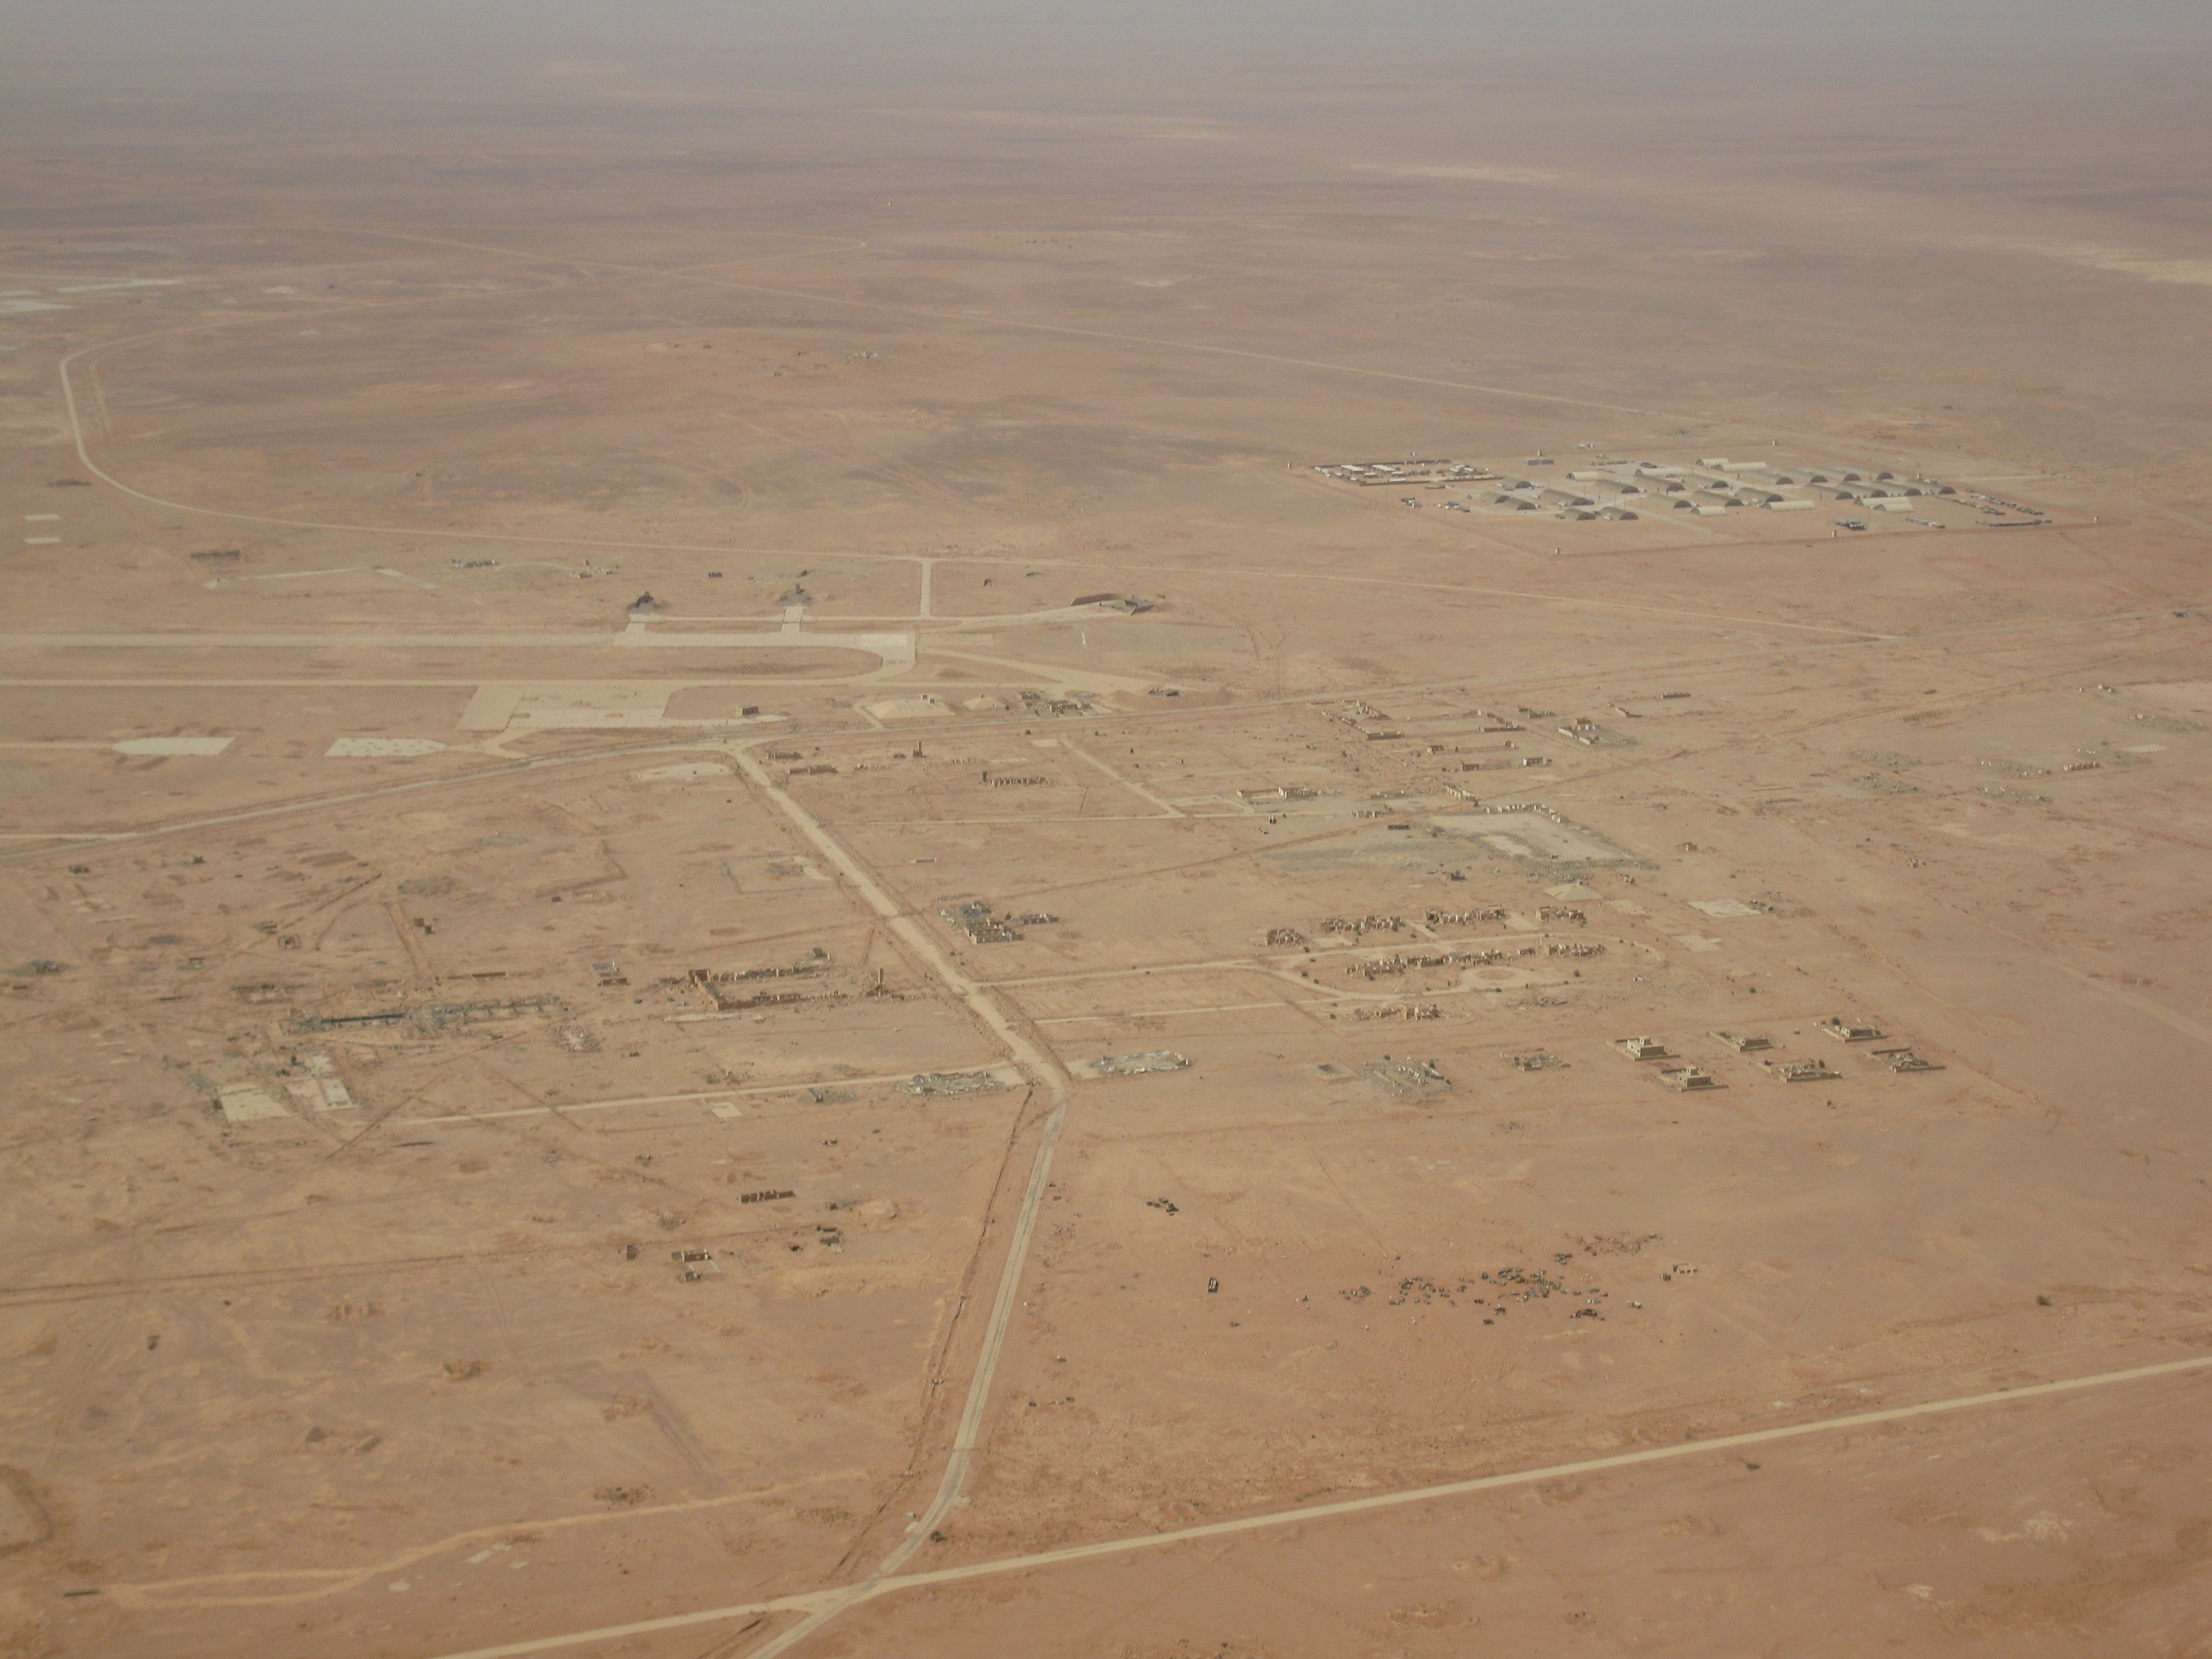 An old destroyed Iraqi airbase from the first Gulf War